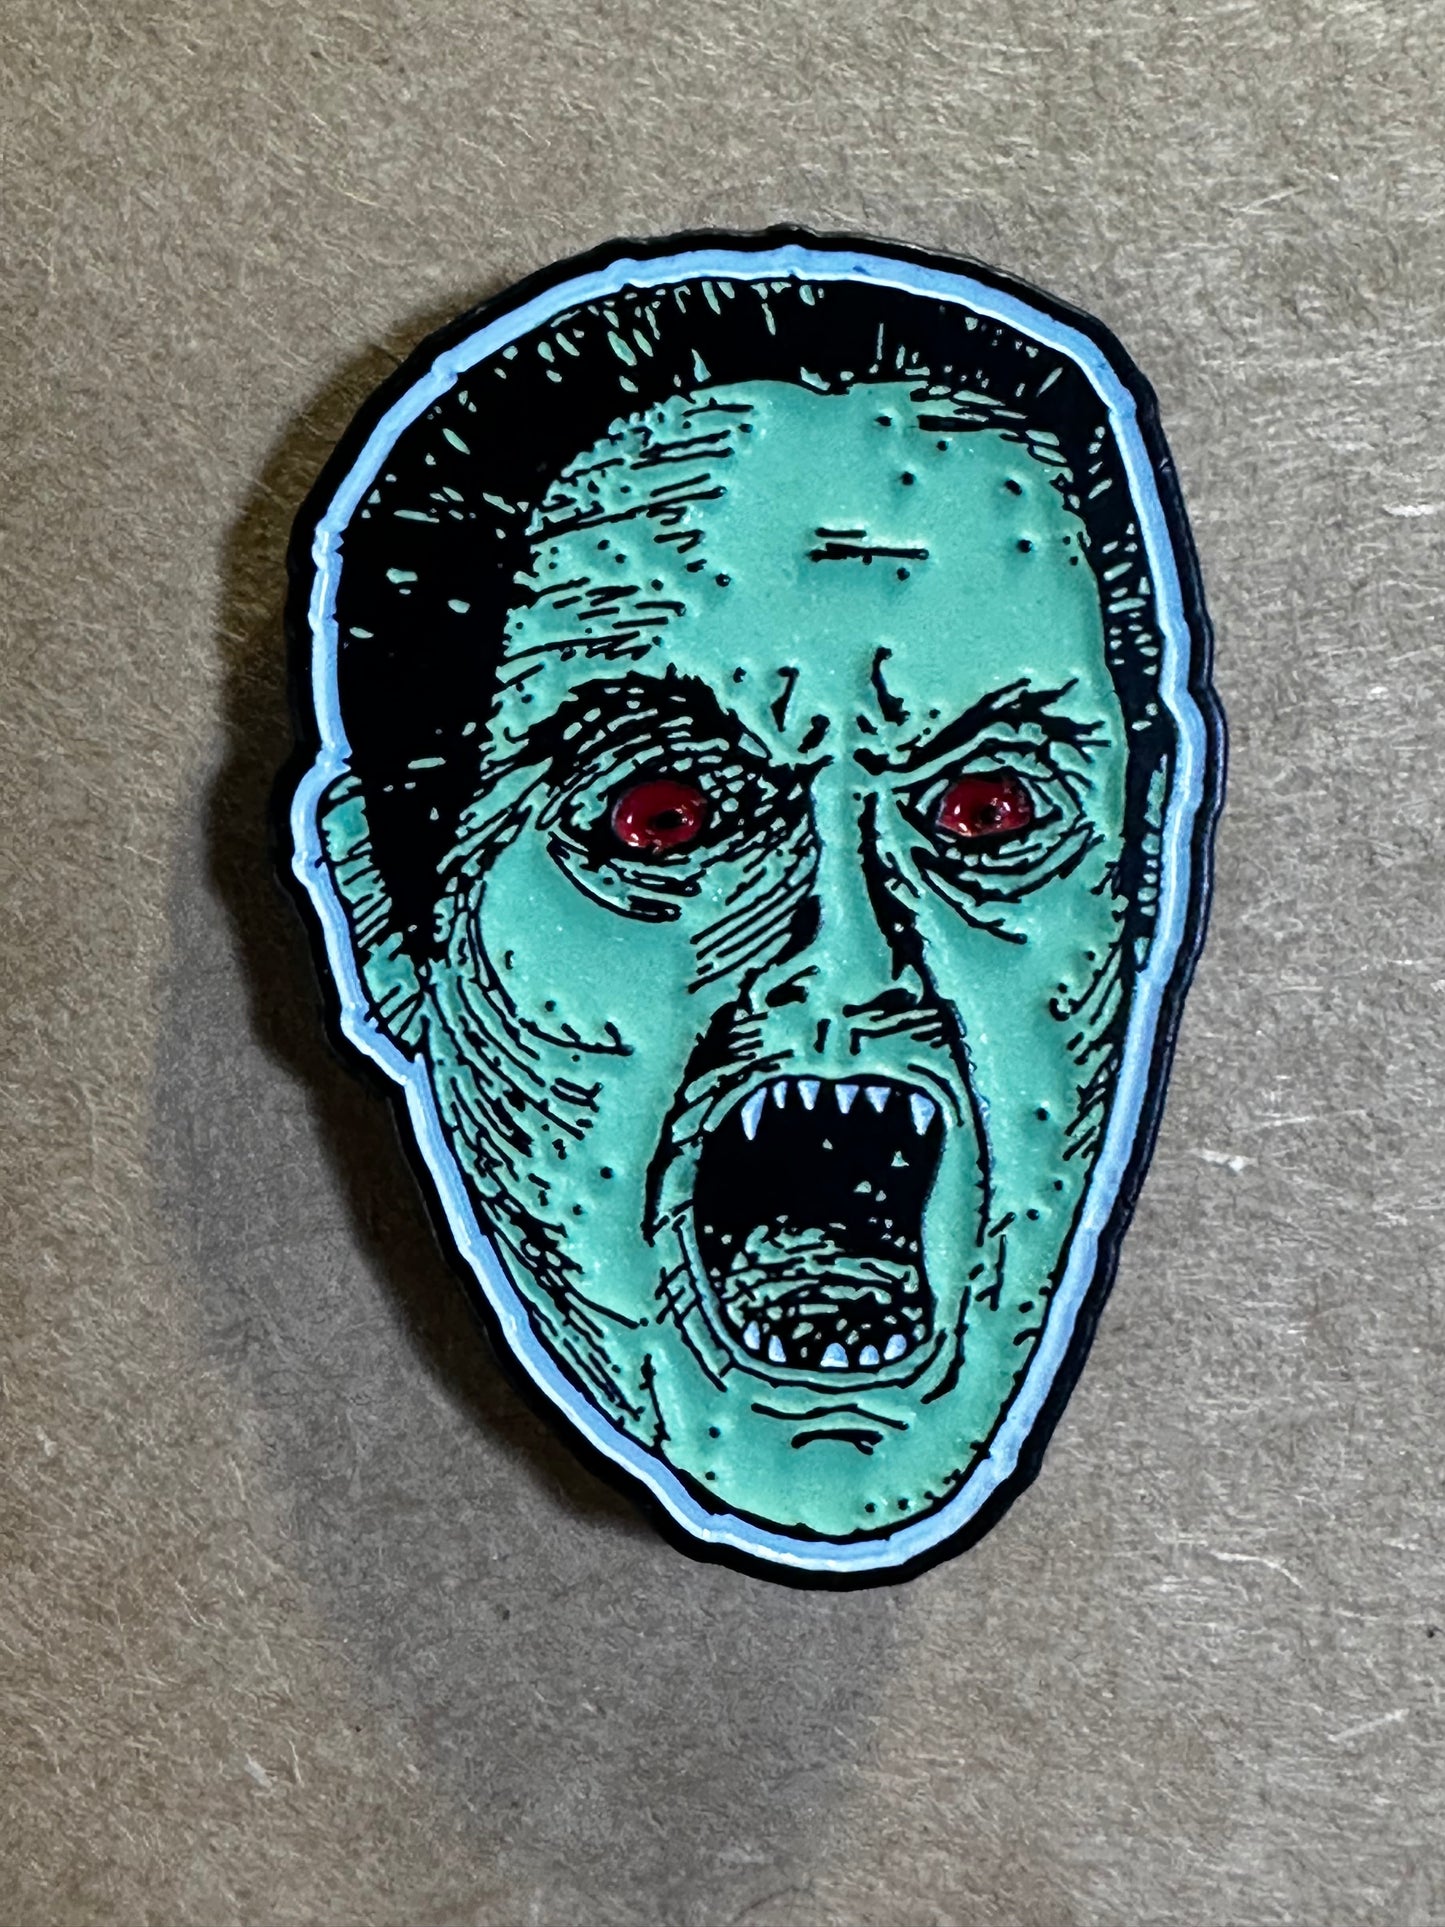 The Monster Squad enamel pins